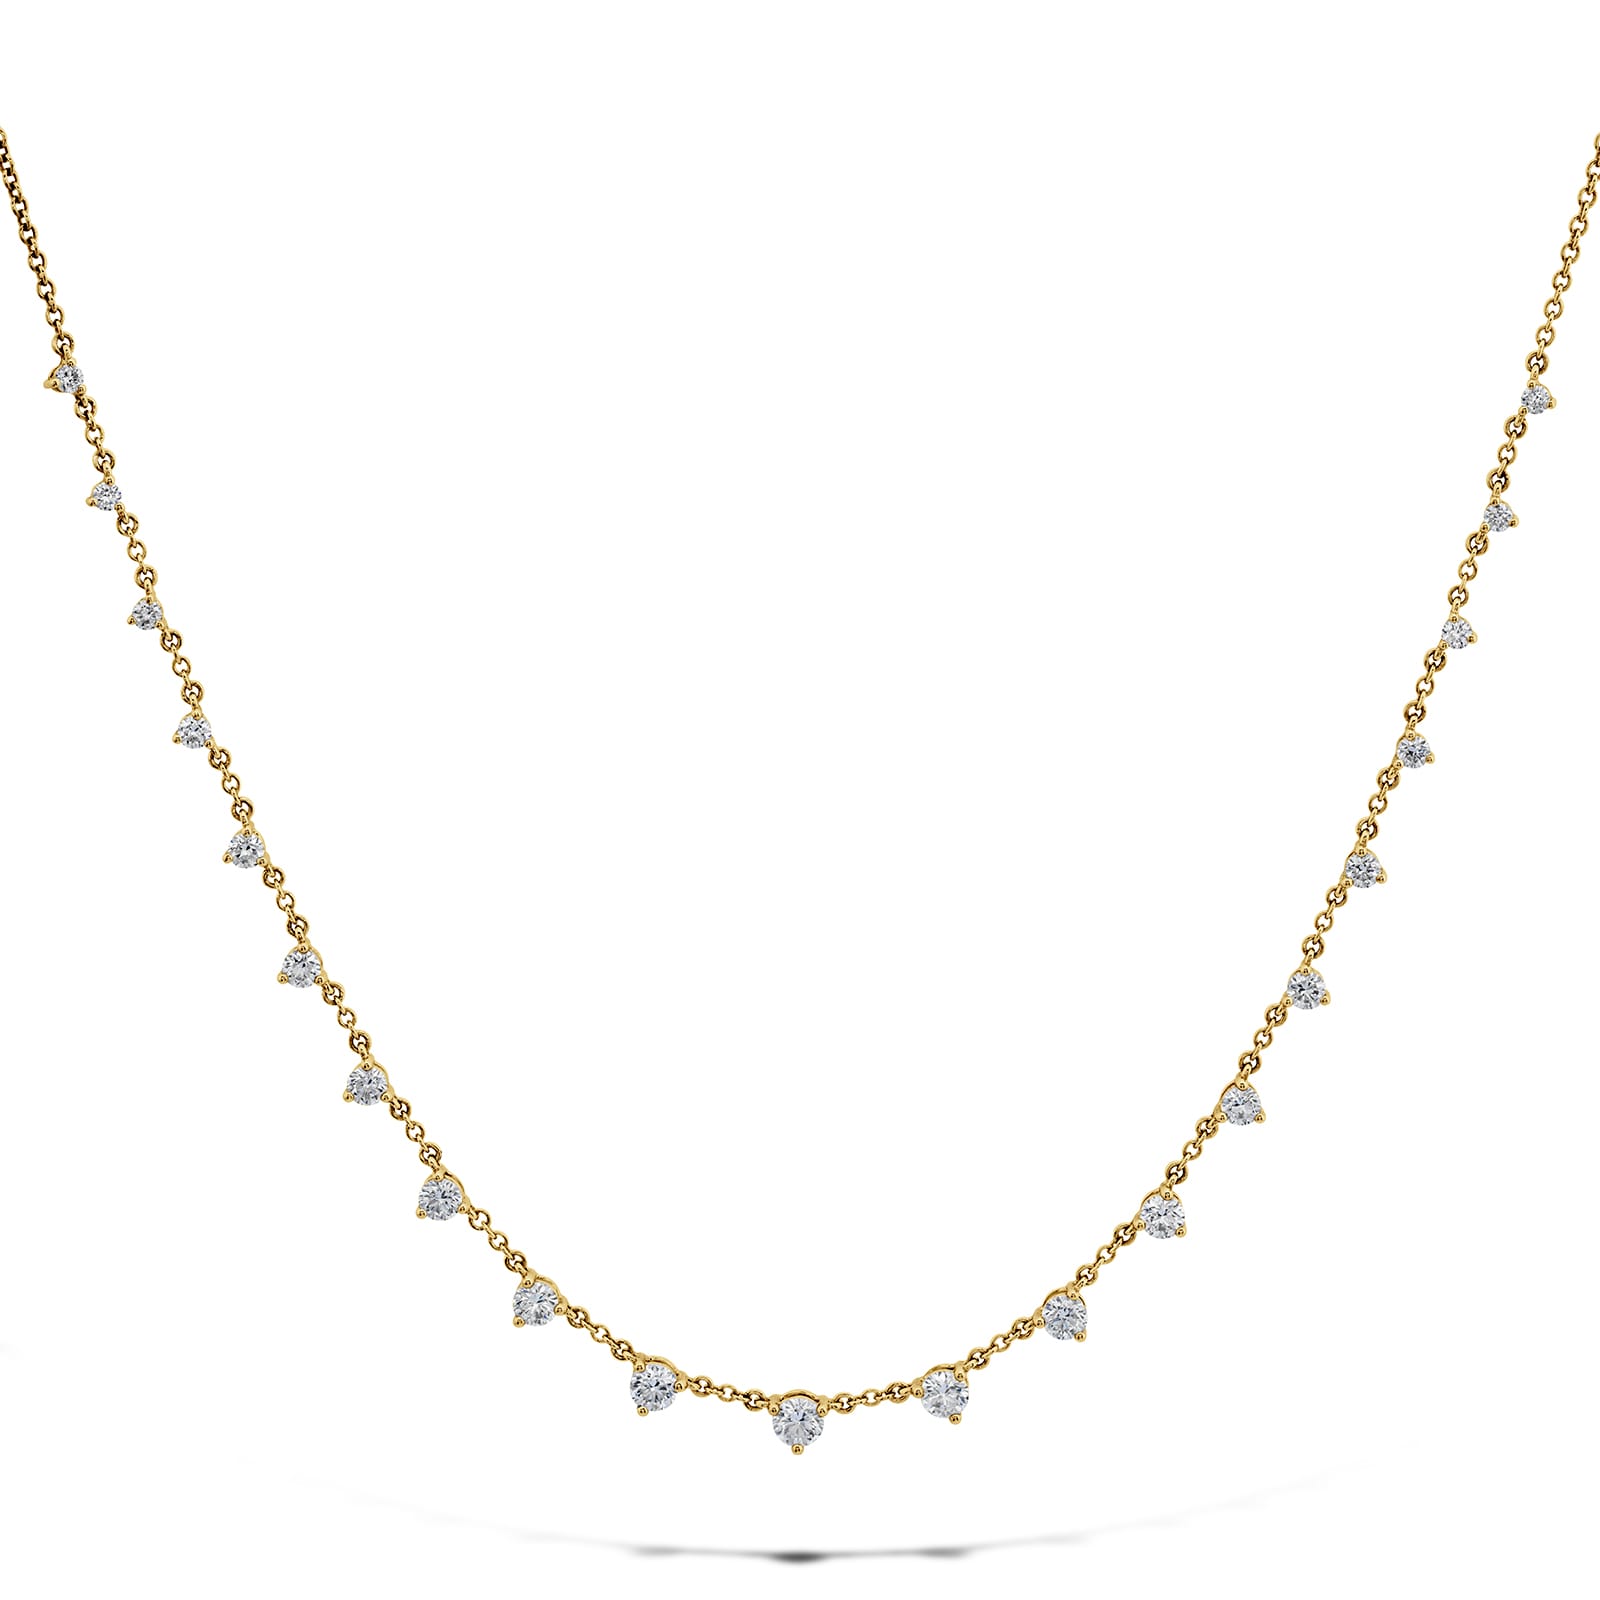 18k Yellow Gold 1.14cttw Diamond Station Necklace